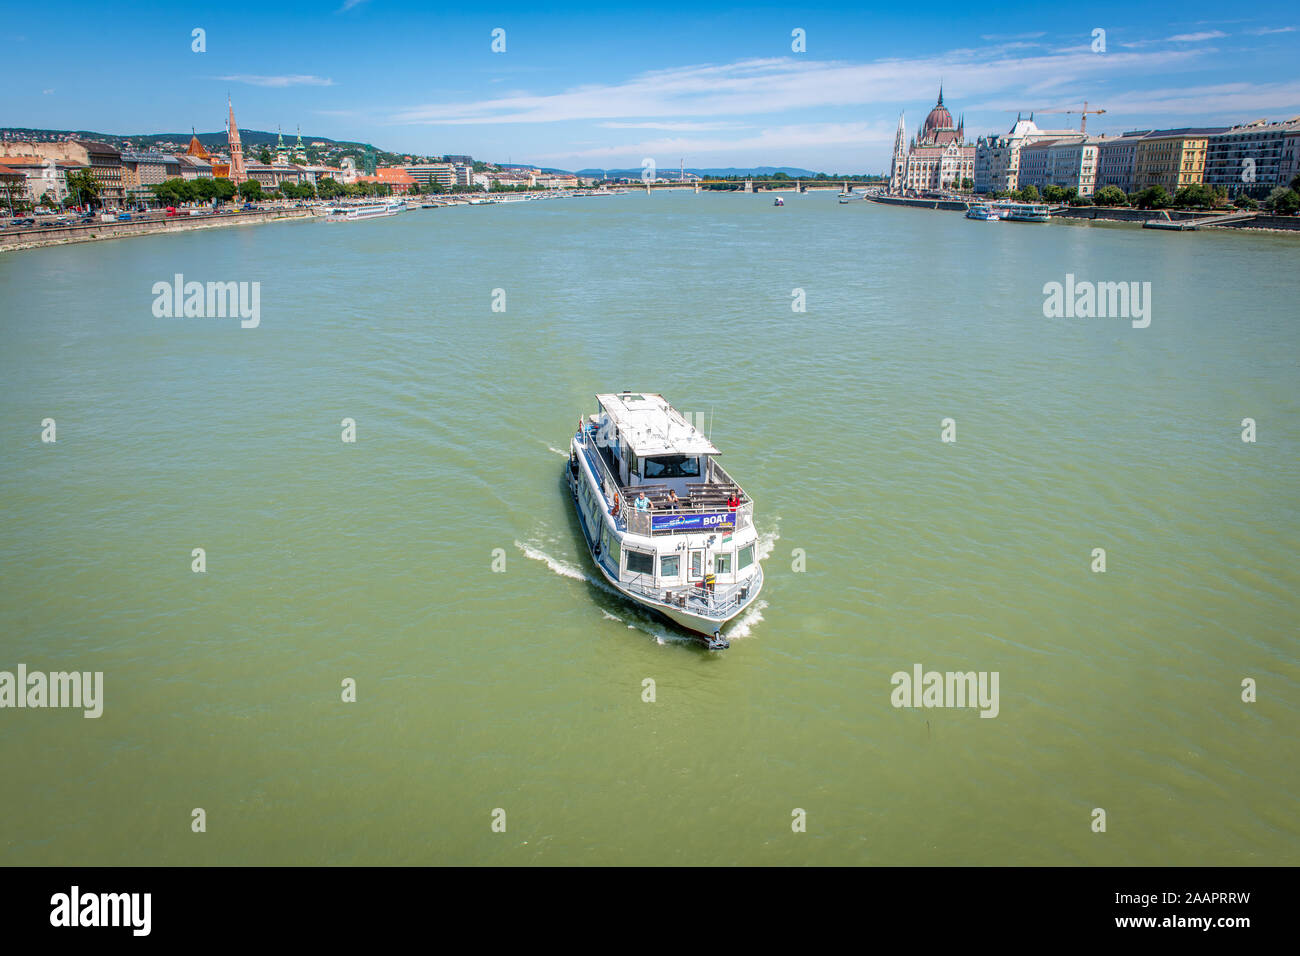 A river boat tour on the Danube river, Budapest, Hungary Stock Photo